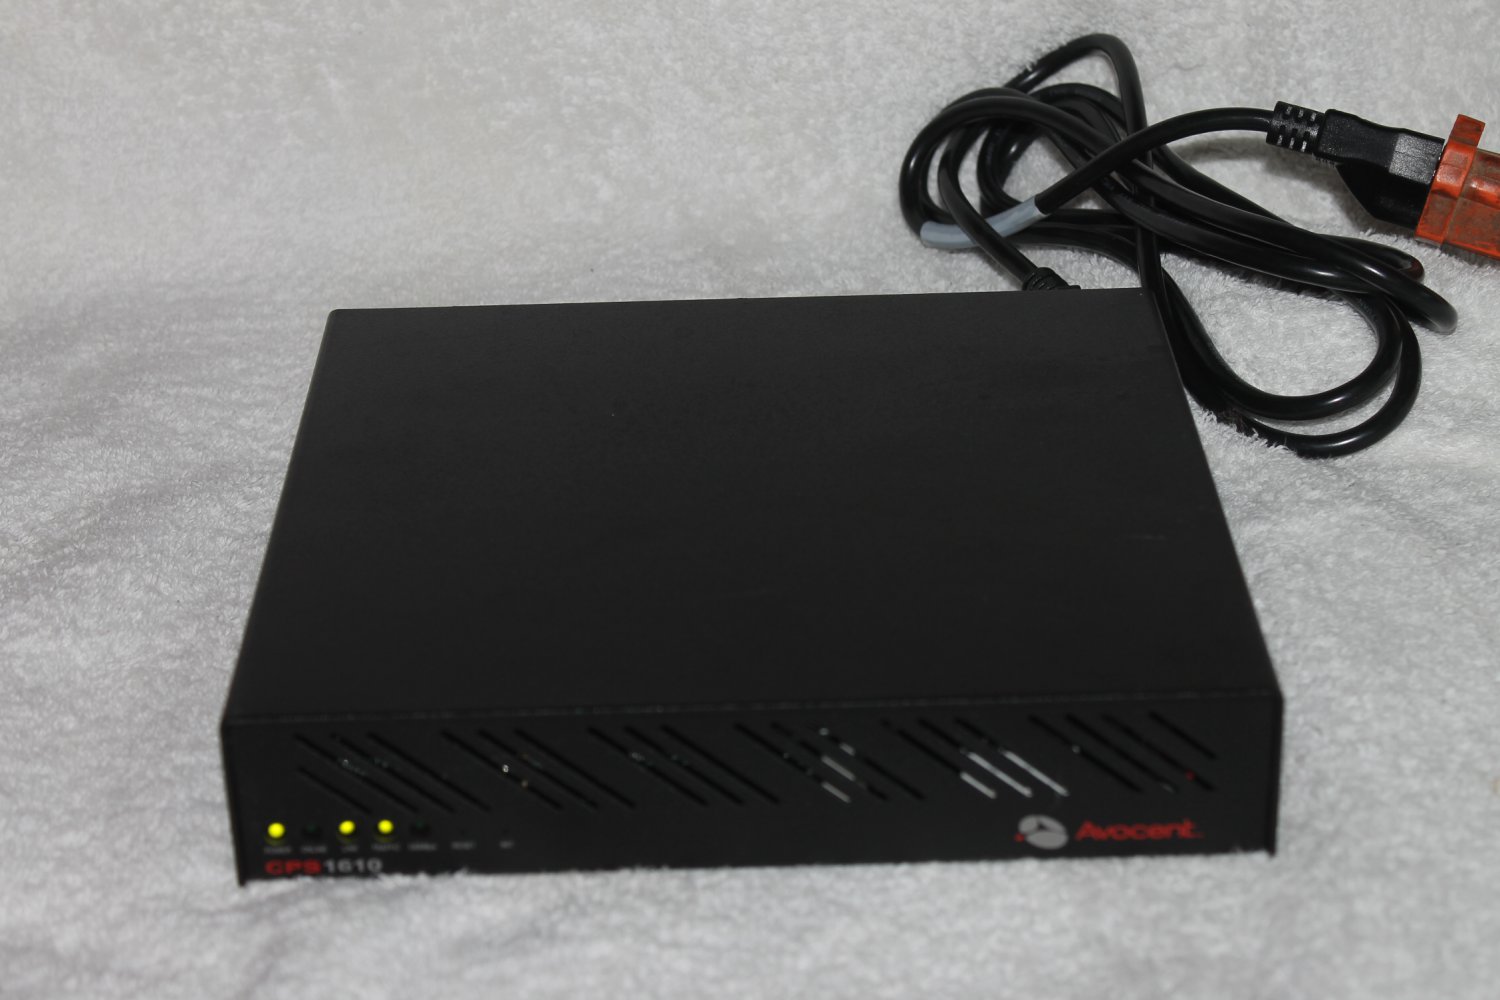 AVOCENT 16 PORT CONSOLE SERVER CPS1610 790205-011 WITH POWER CABLE